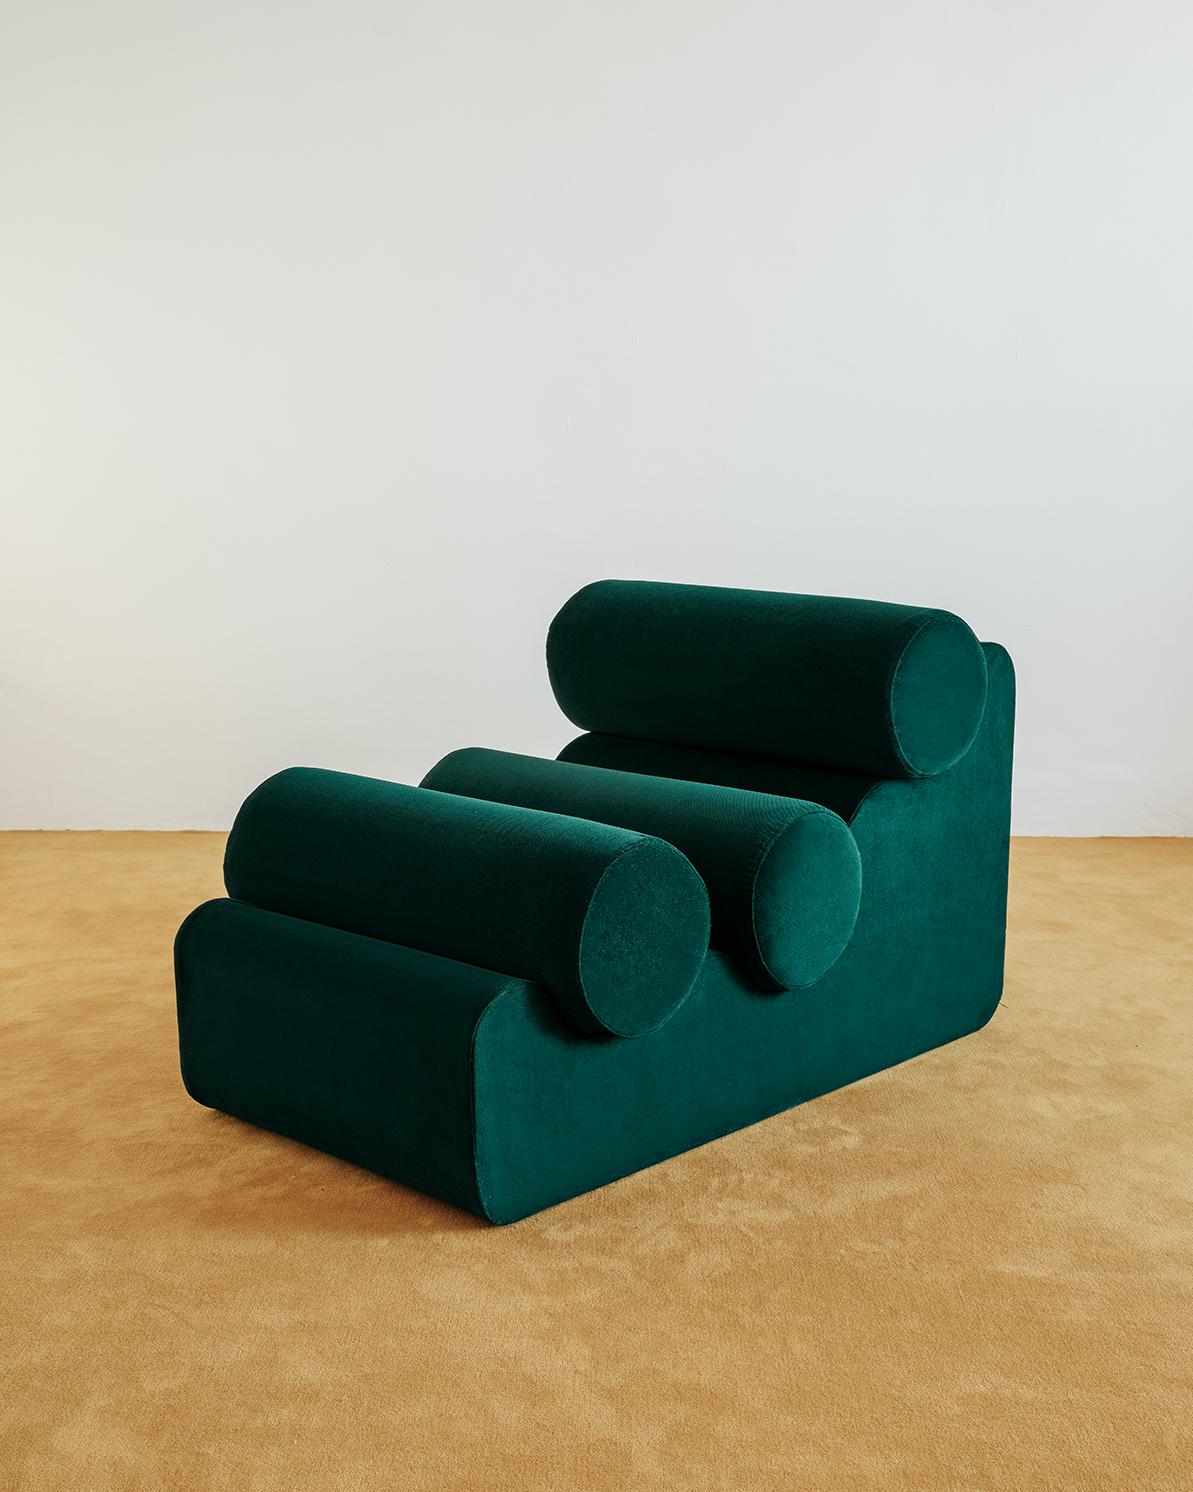 La Pepino is a collection of only seating, which consists of the repetition of cylindrical cushions, supported by an organically shaped base. Every piece comes entirely upholstered in customizable fabric, and plays with the different points of